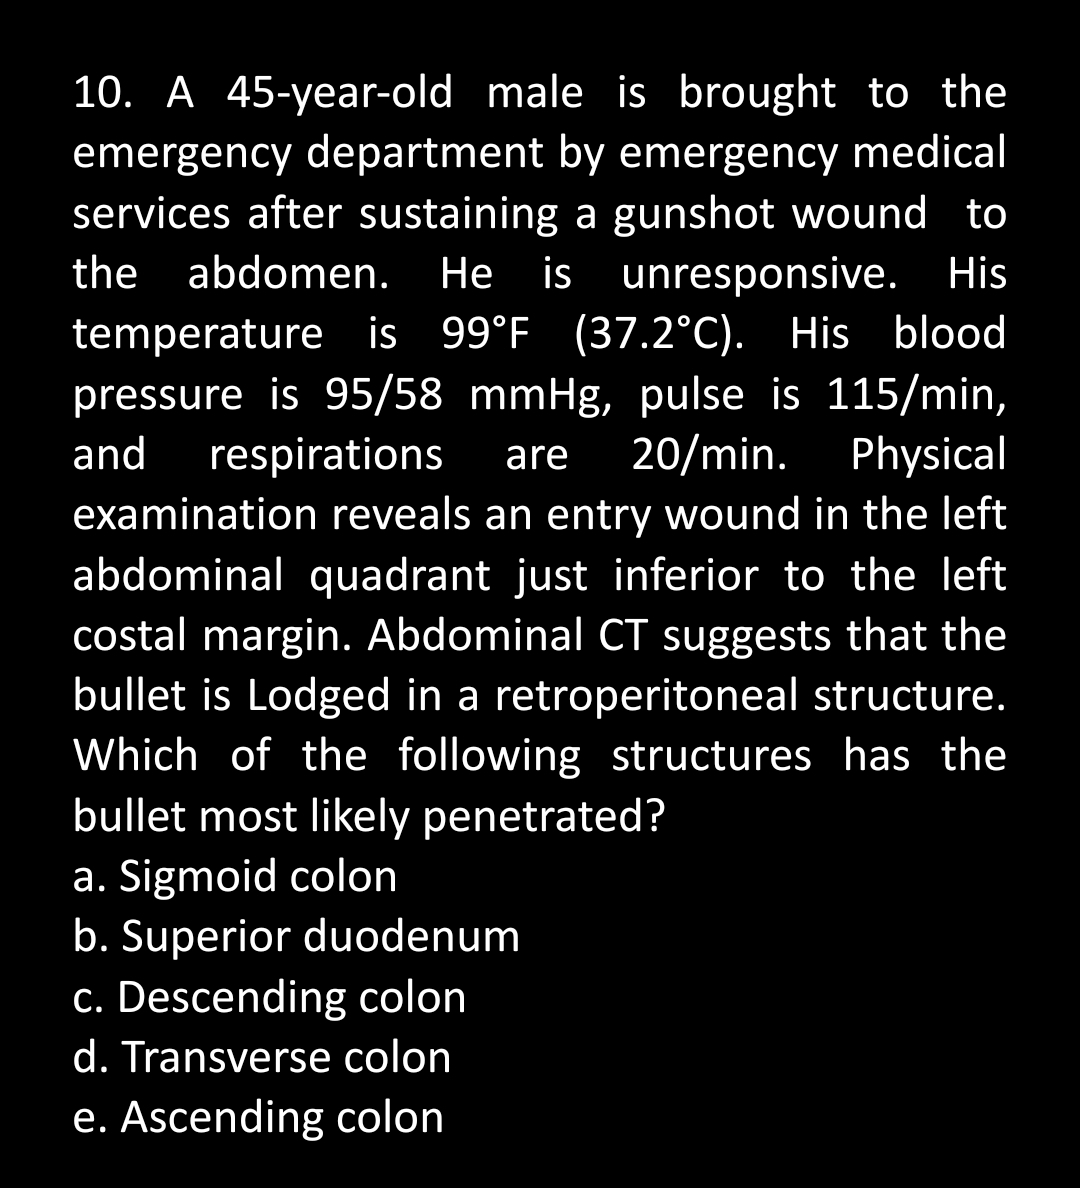 10. A 45-year-old male is brought to the
emergency department by emergency medical
services after sustaining a gunshot wound to
the abdomen. He is unresponsive. His
temperature is 99°F (37.2°C). His blood
pressure is 95/58 mmHg, pulse is 115/min,
and respirations are 20/min. Physical
examination reveals an entry wound in the left
abdominal quadrant just inferior to the left
costal margin. Abdominal CT suggests that the
bullet is Lodged in a retroperitoneal structure.
Which of the following structures has the
bullet most likely penetrated?
a. Sigmoid colon
b. Superior duodenum
c. Descending colon
d. Transverse colon
e. Ascending colon